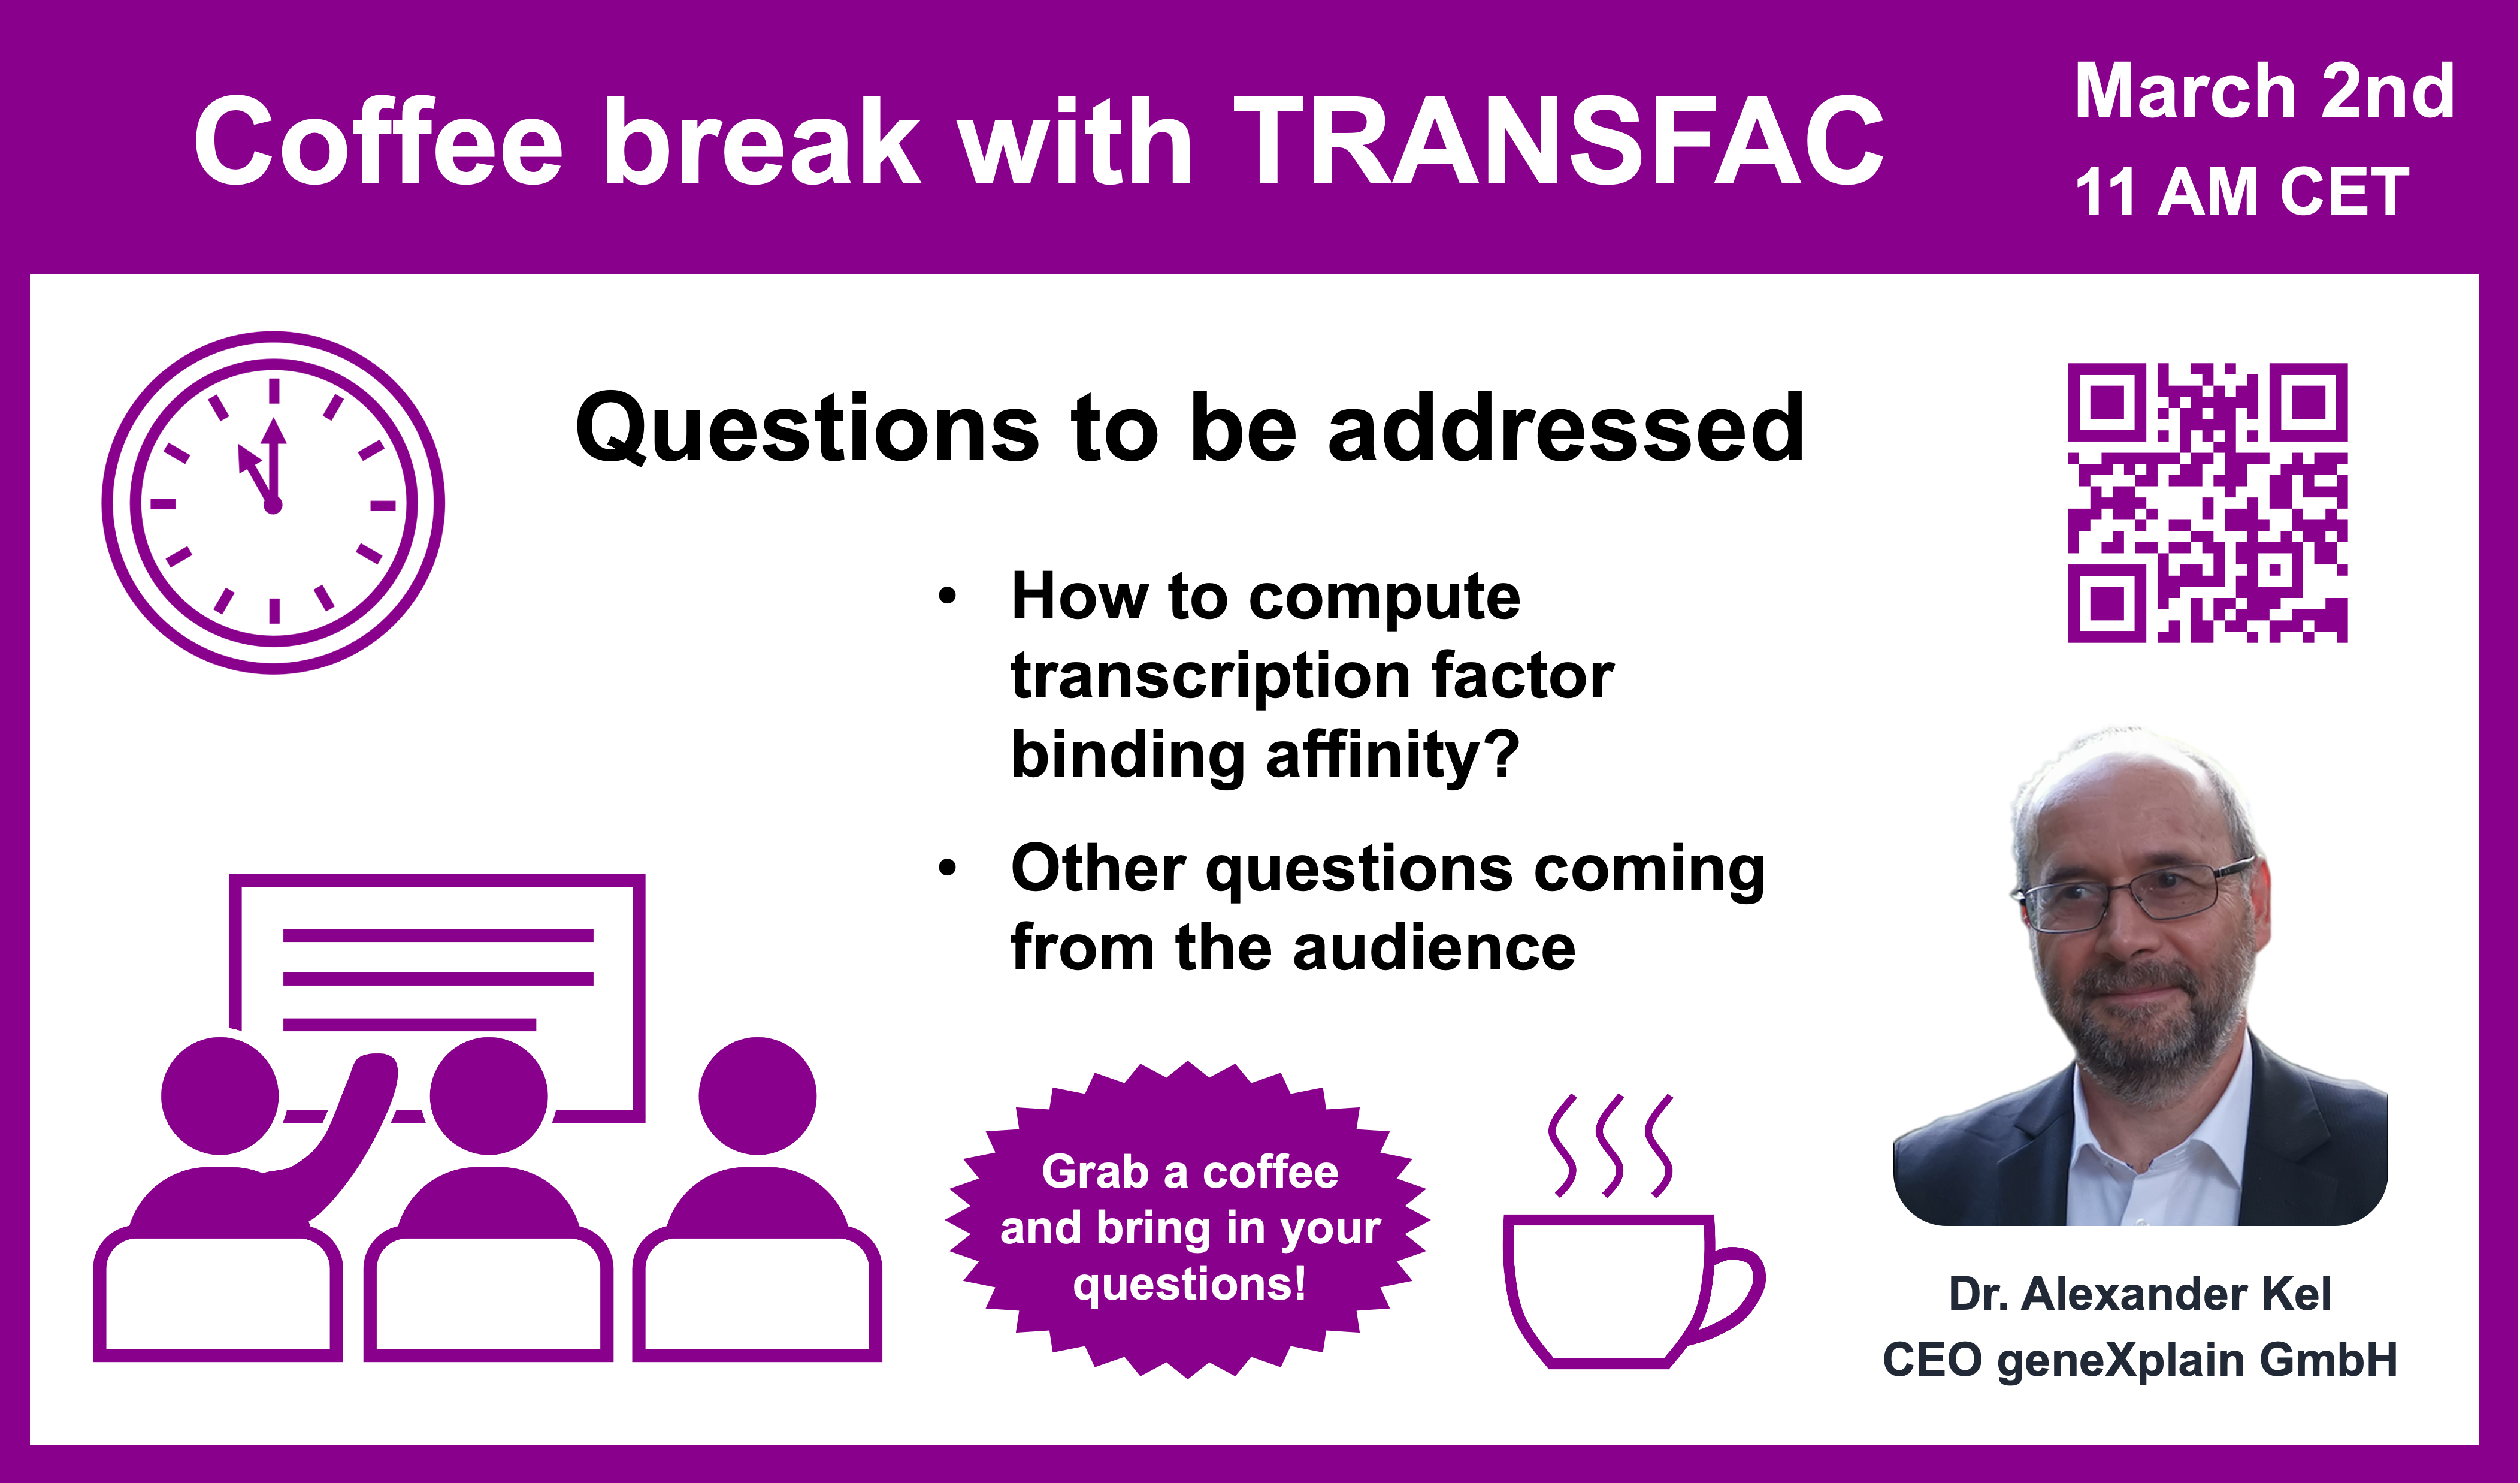 Coffee break with TRANSFAC March 2nd 11 AM CET